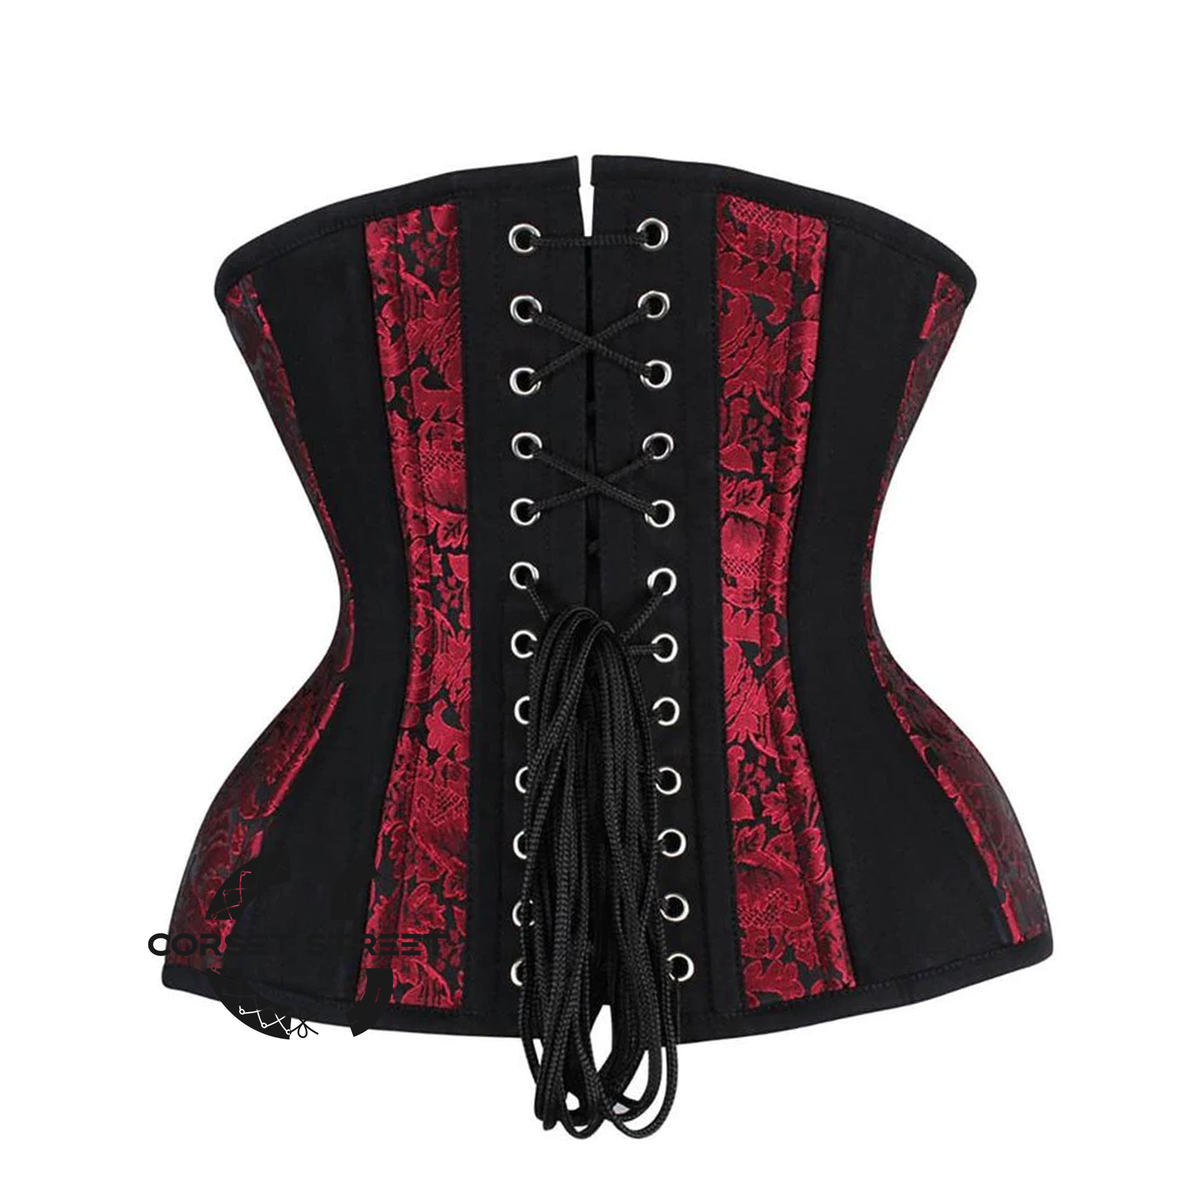 Red and Black Brocade Black Cotton With White Lace Gothic Underbust Waist Training Corset